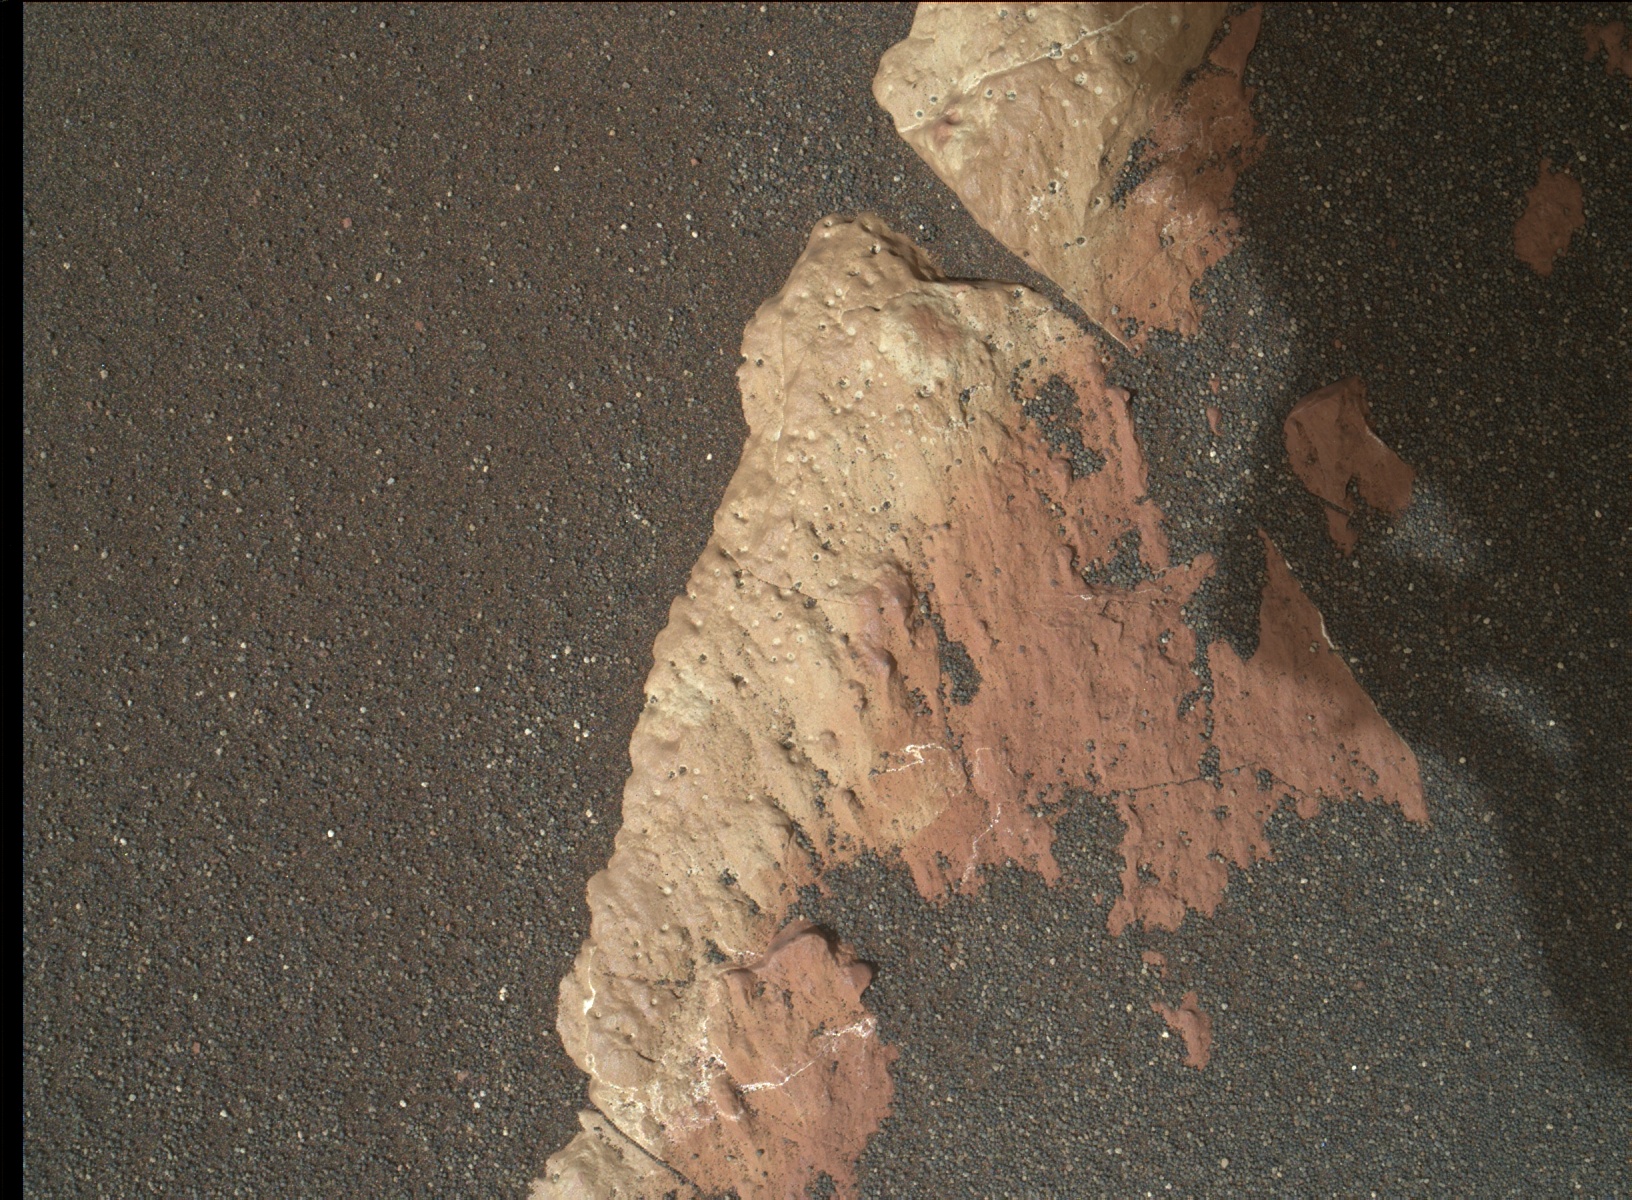 Nasa's Mars rover Curiosity acquired this image using its Mars Hand Lens Imager (MAHLI) on Sol 1572